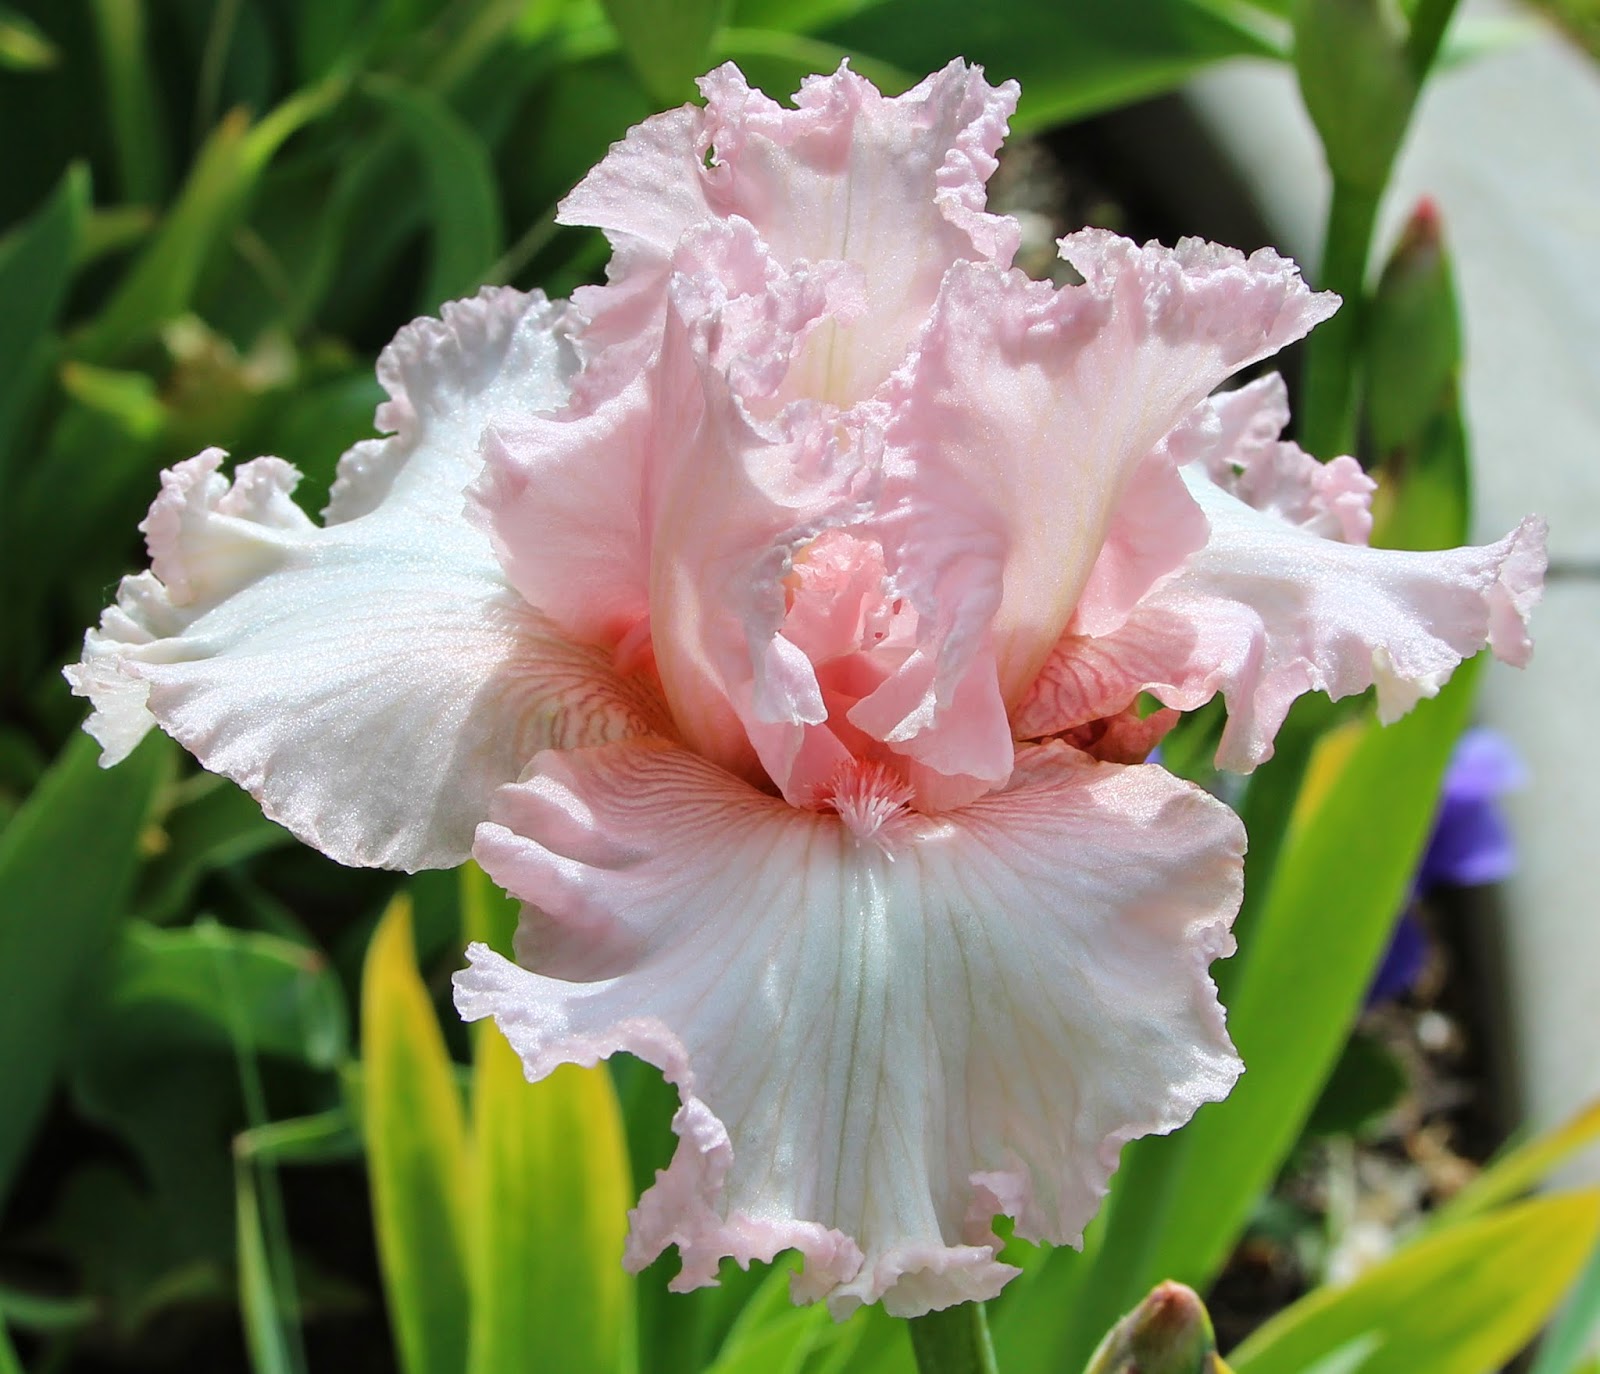 TALL BEARDED IRIS IN MY GARDEN TODAY - Sowing the Seeds